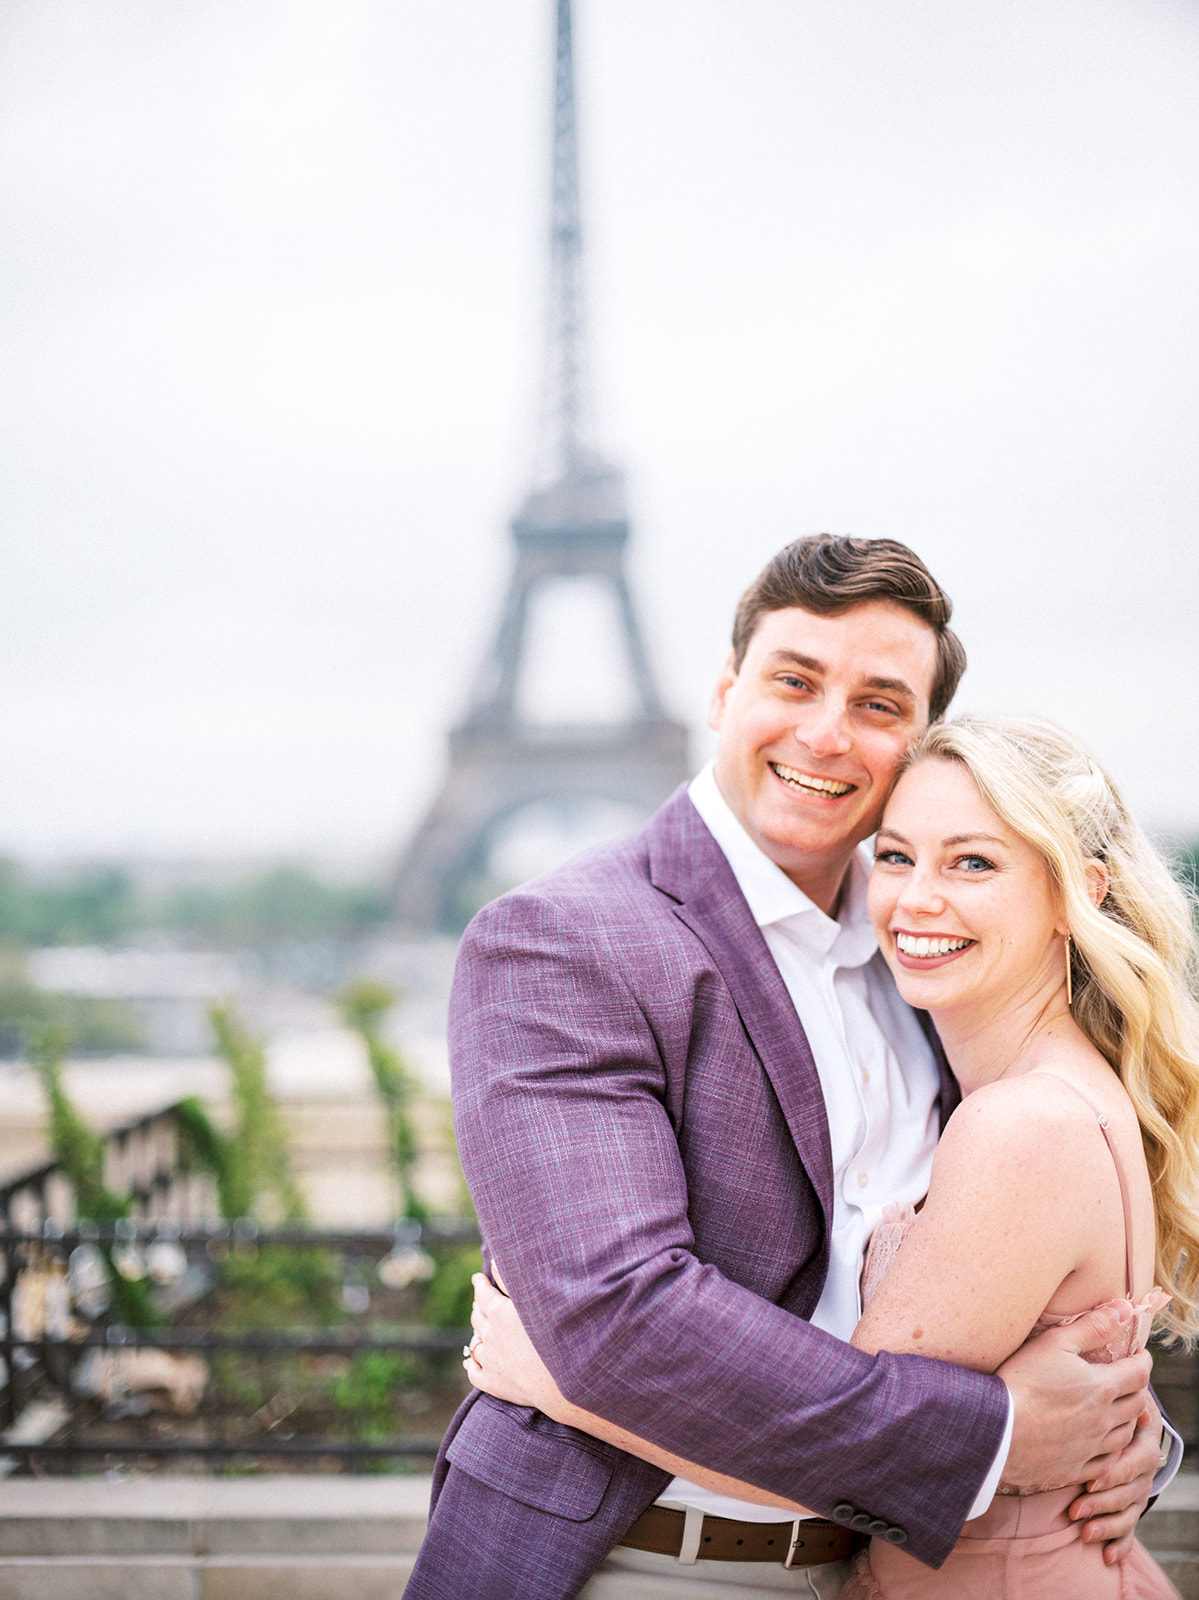 Couple smiling looking at camera with Eiffel Tower in the background.